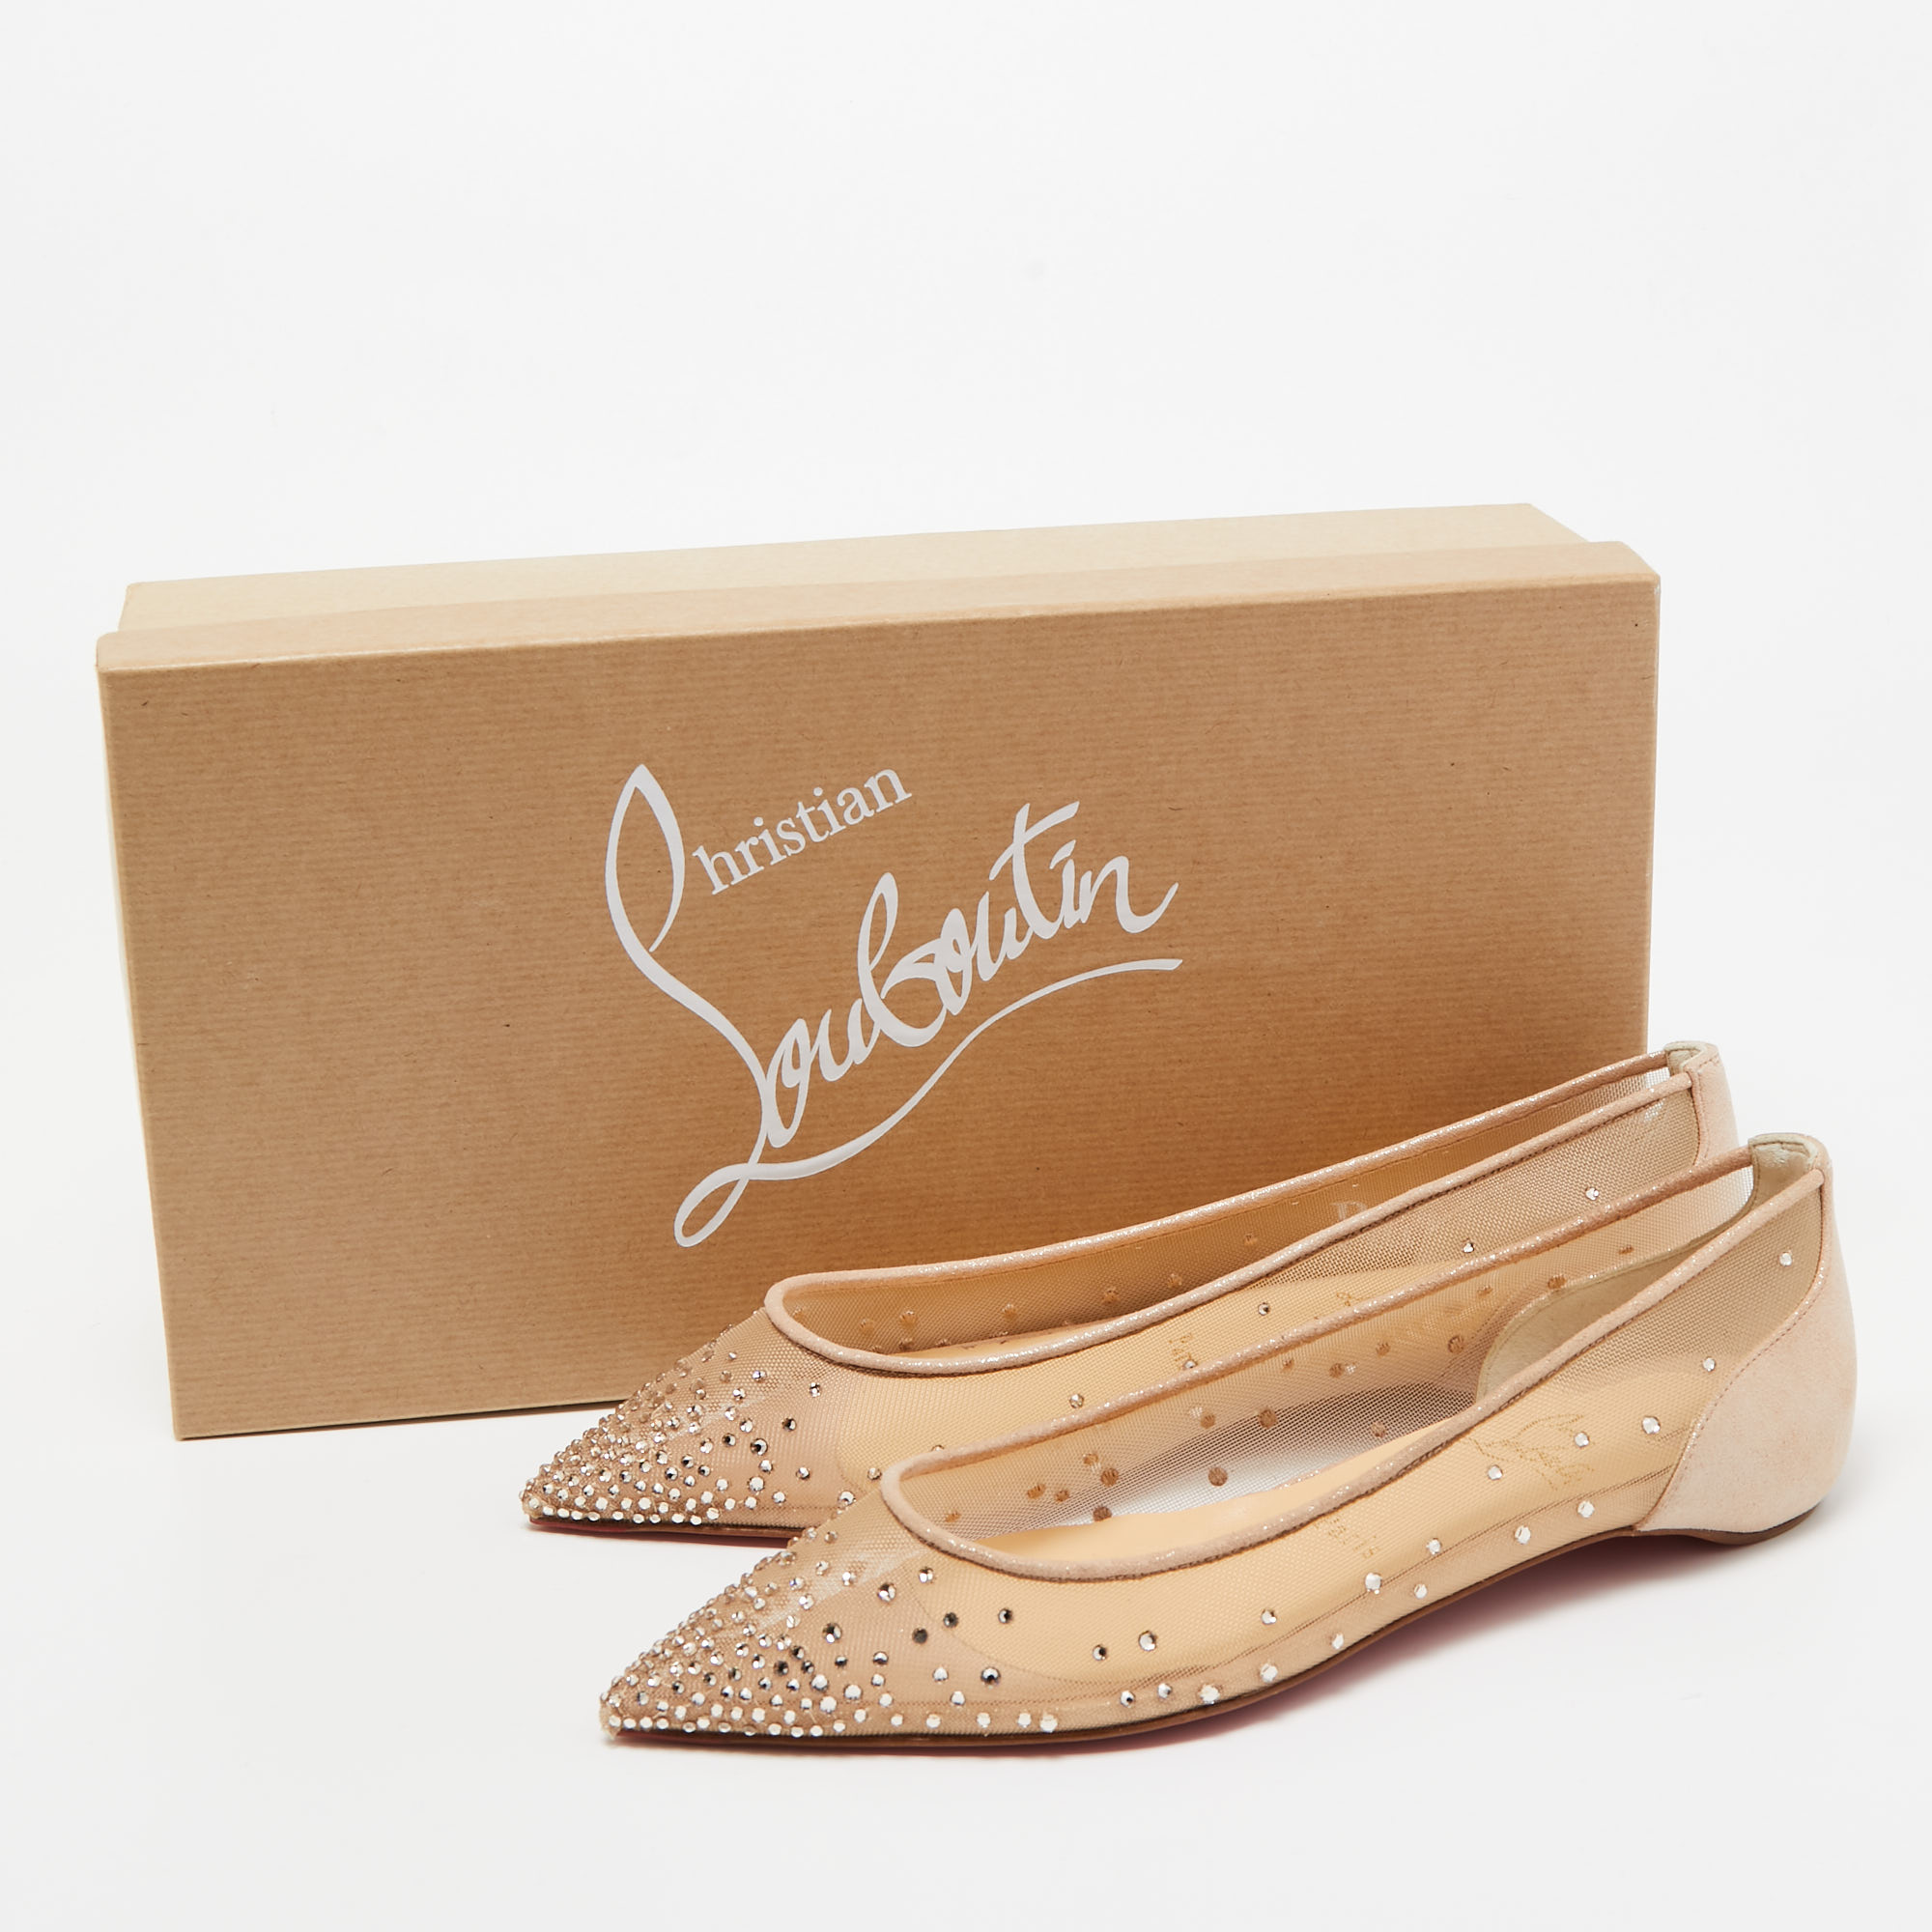 Christian Louboutin Beige Mesh And Suede Follies Strass Ballet Flats Size 38